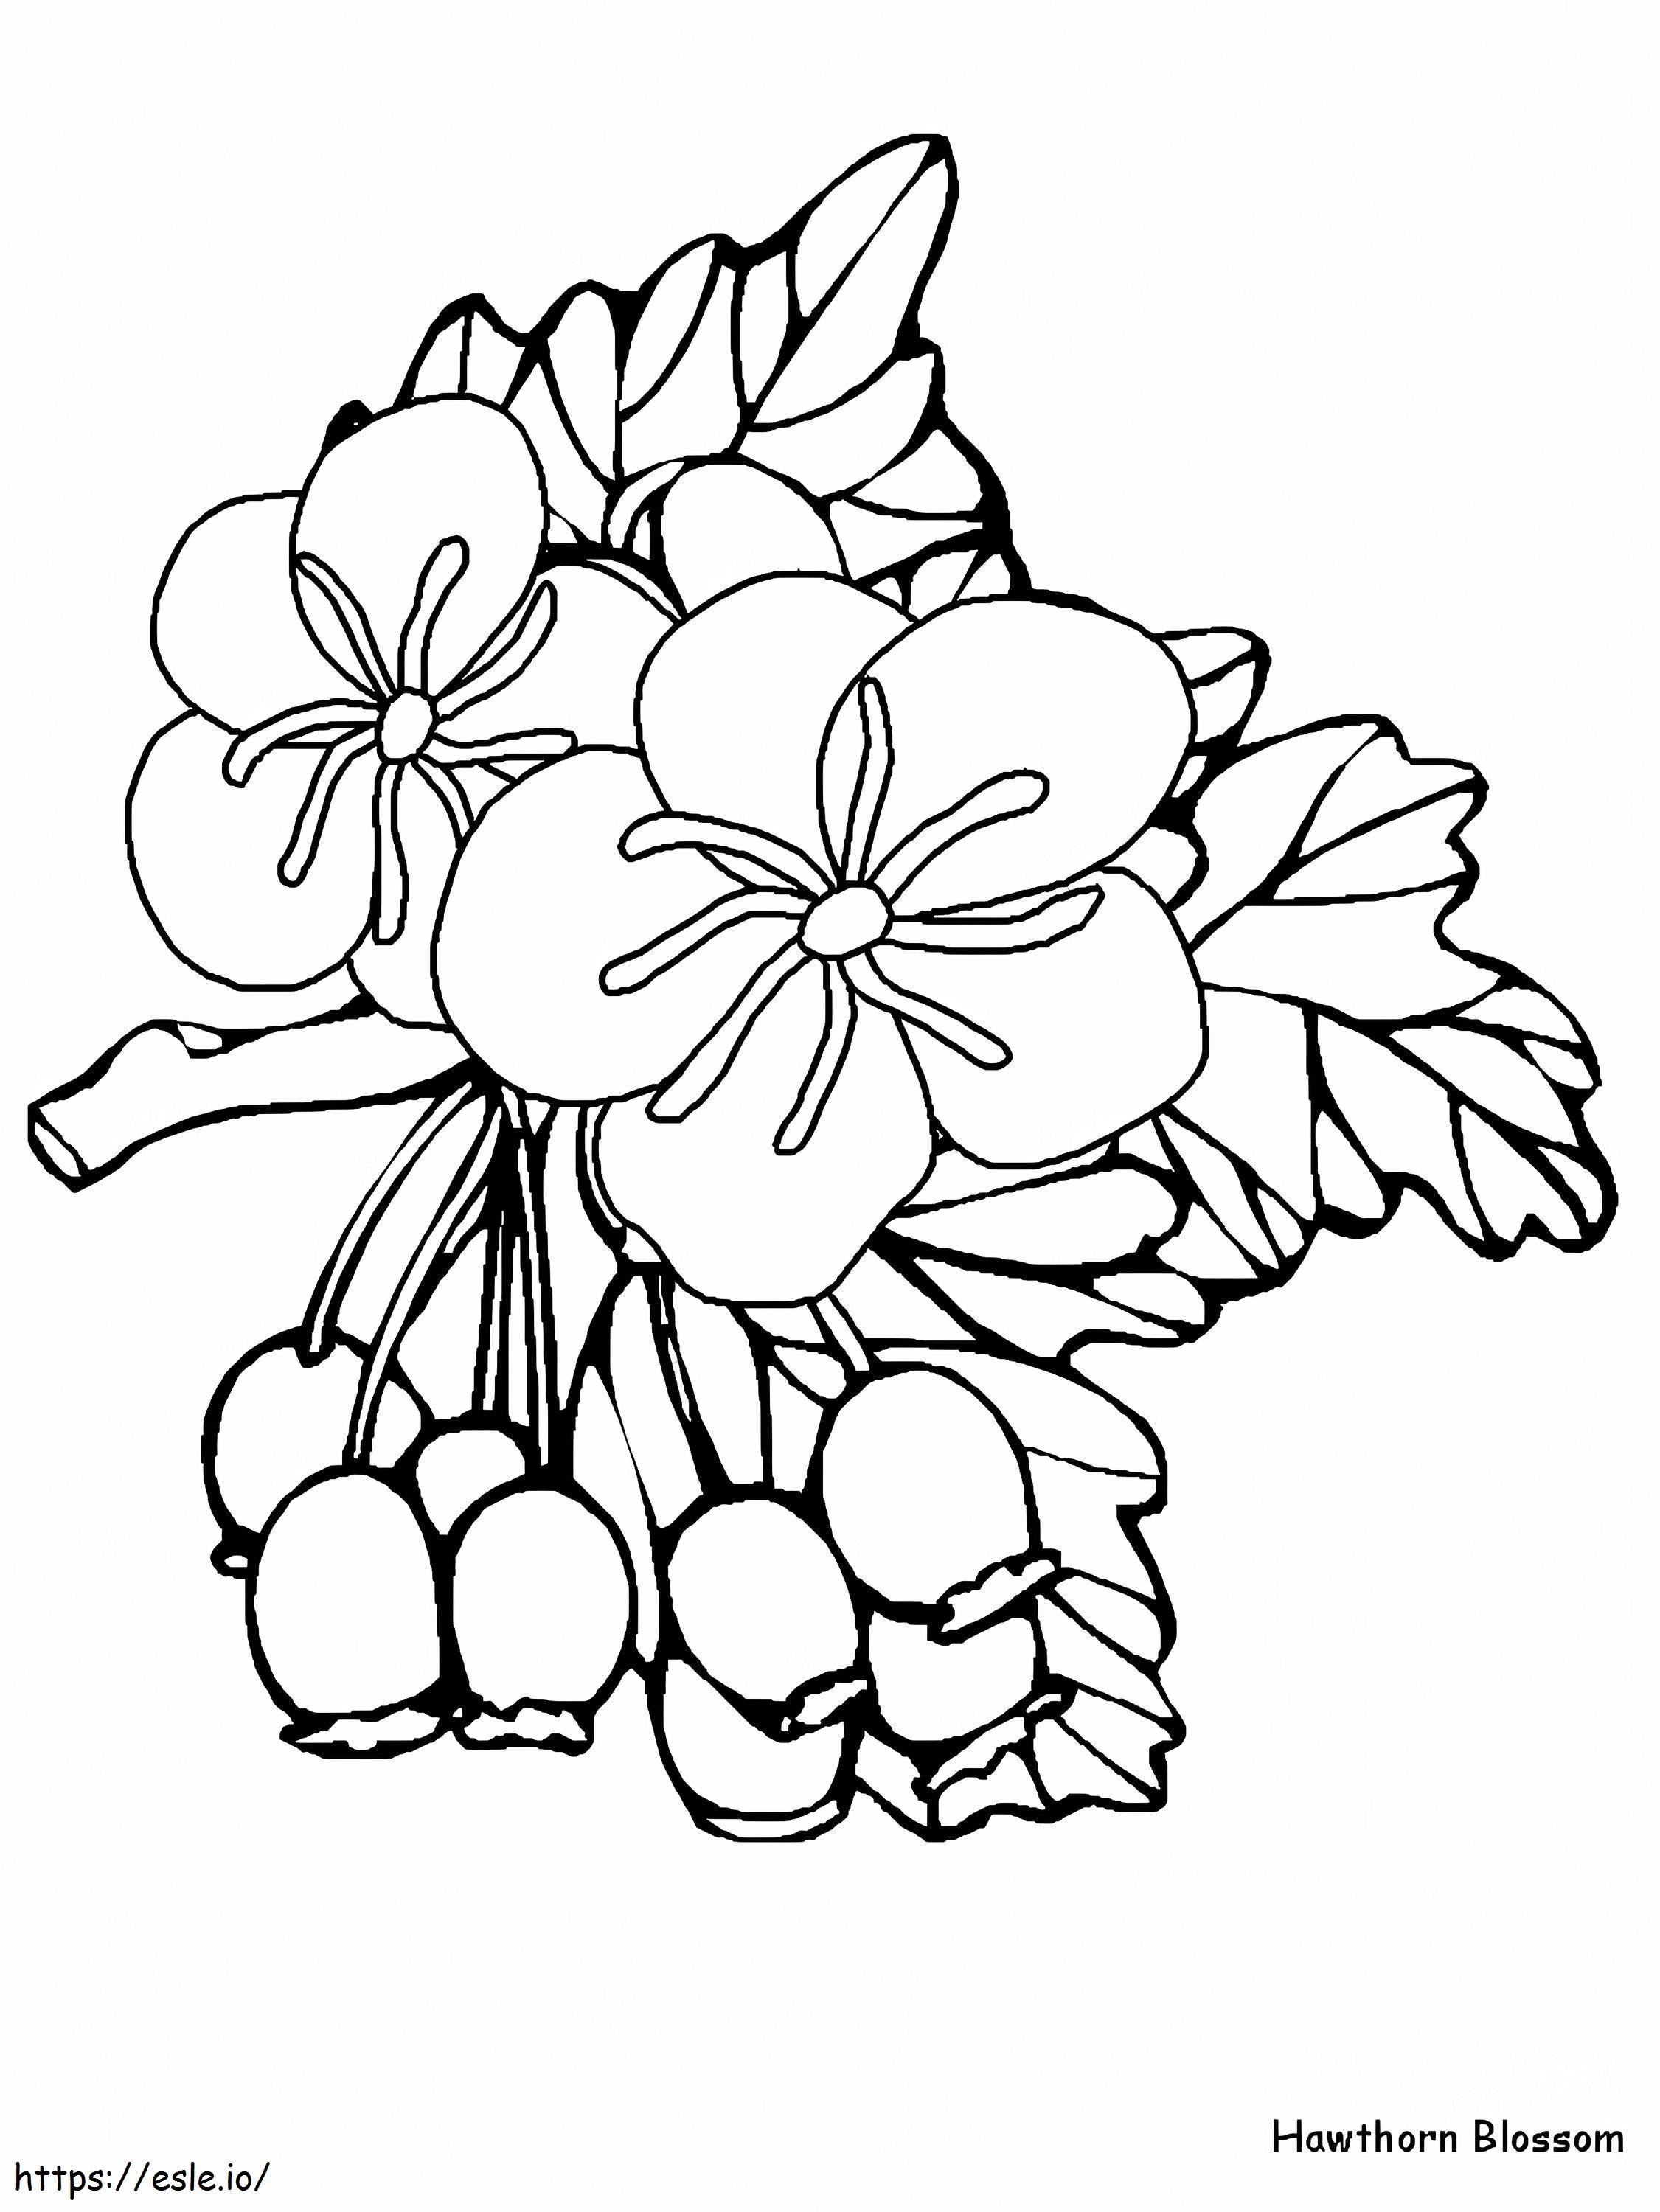 1528168516 Hawthorna4 coloring page